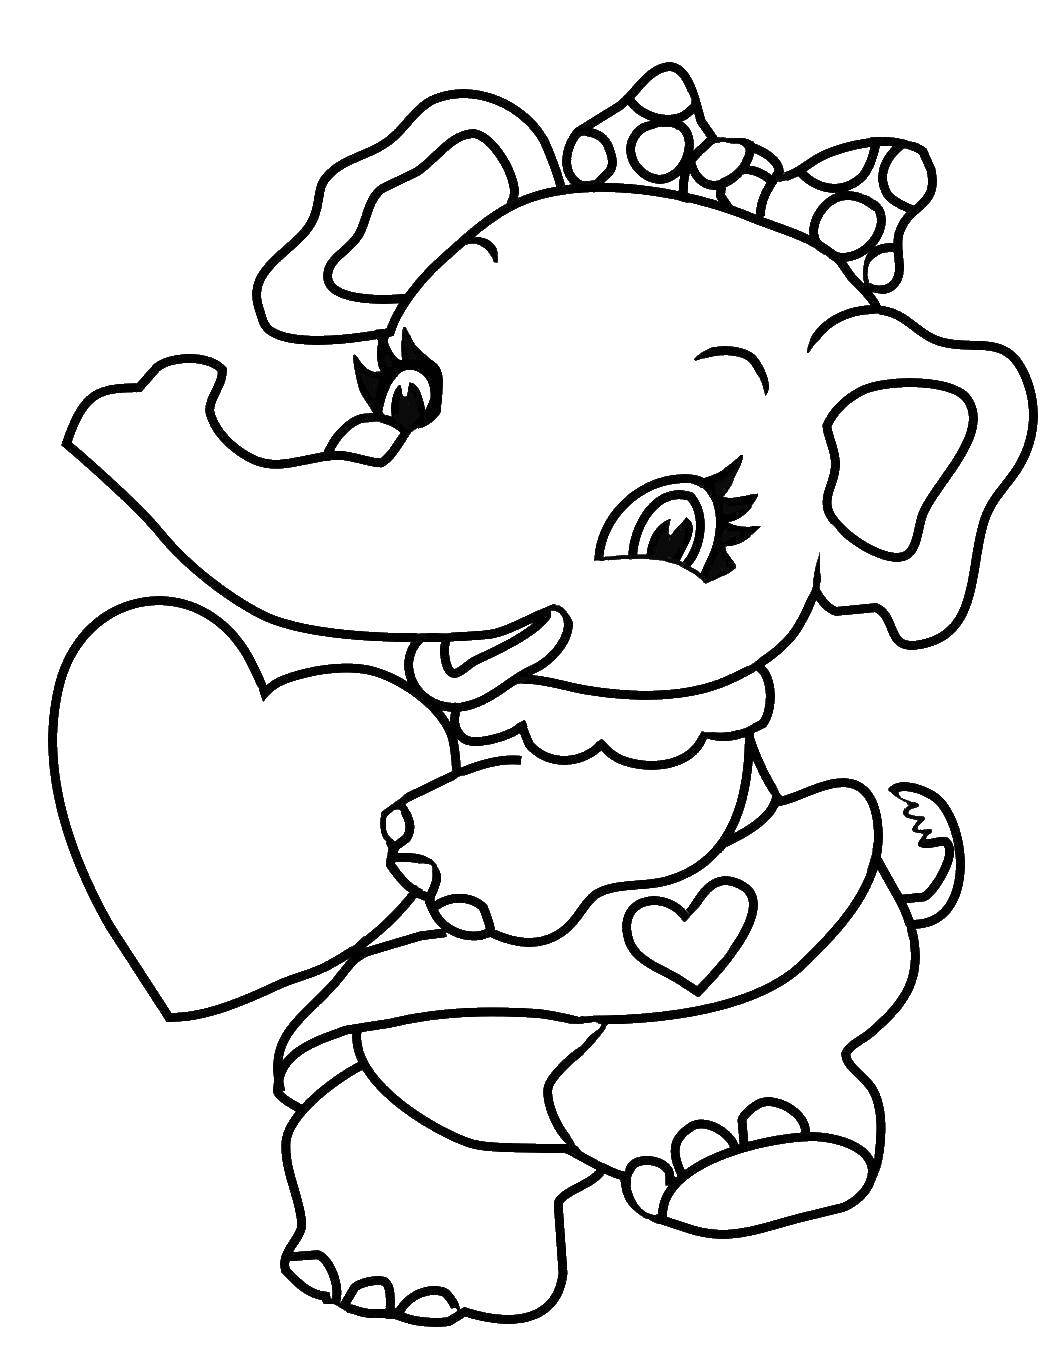 Coloring Elephant with a heart. Category I love you. Tags:  Heart, love.